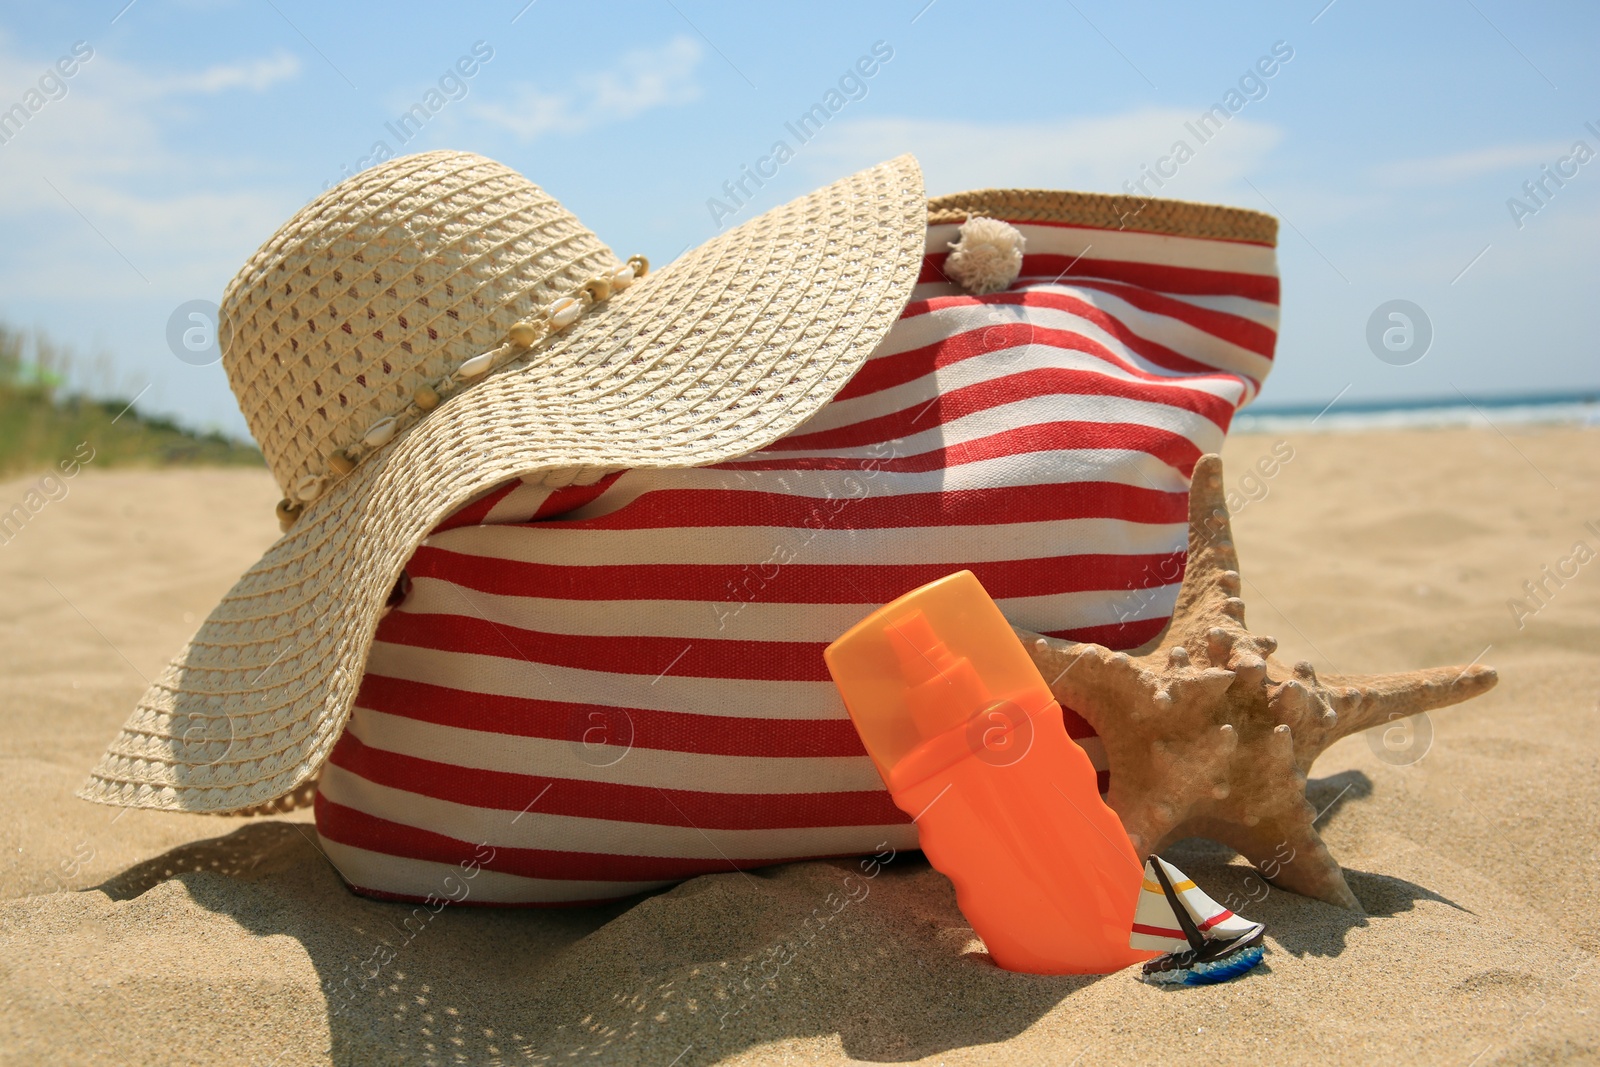 Photo of Bottle of sunscreen, starfish, bag and hat on sand. Sun protection care